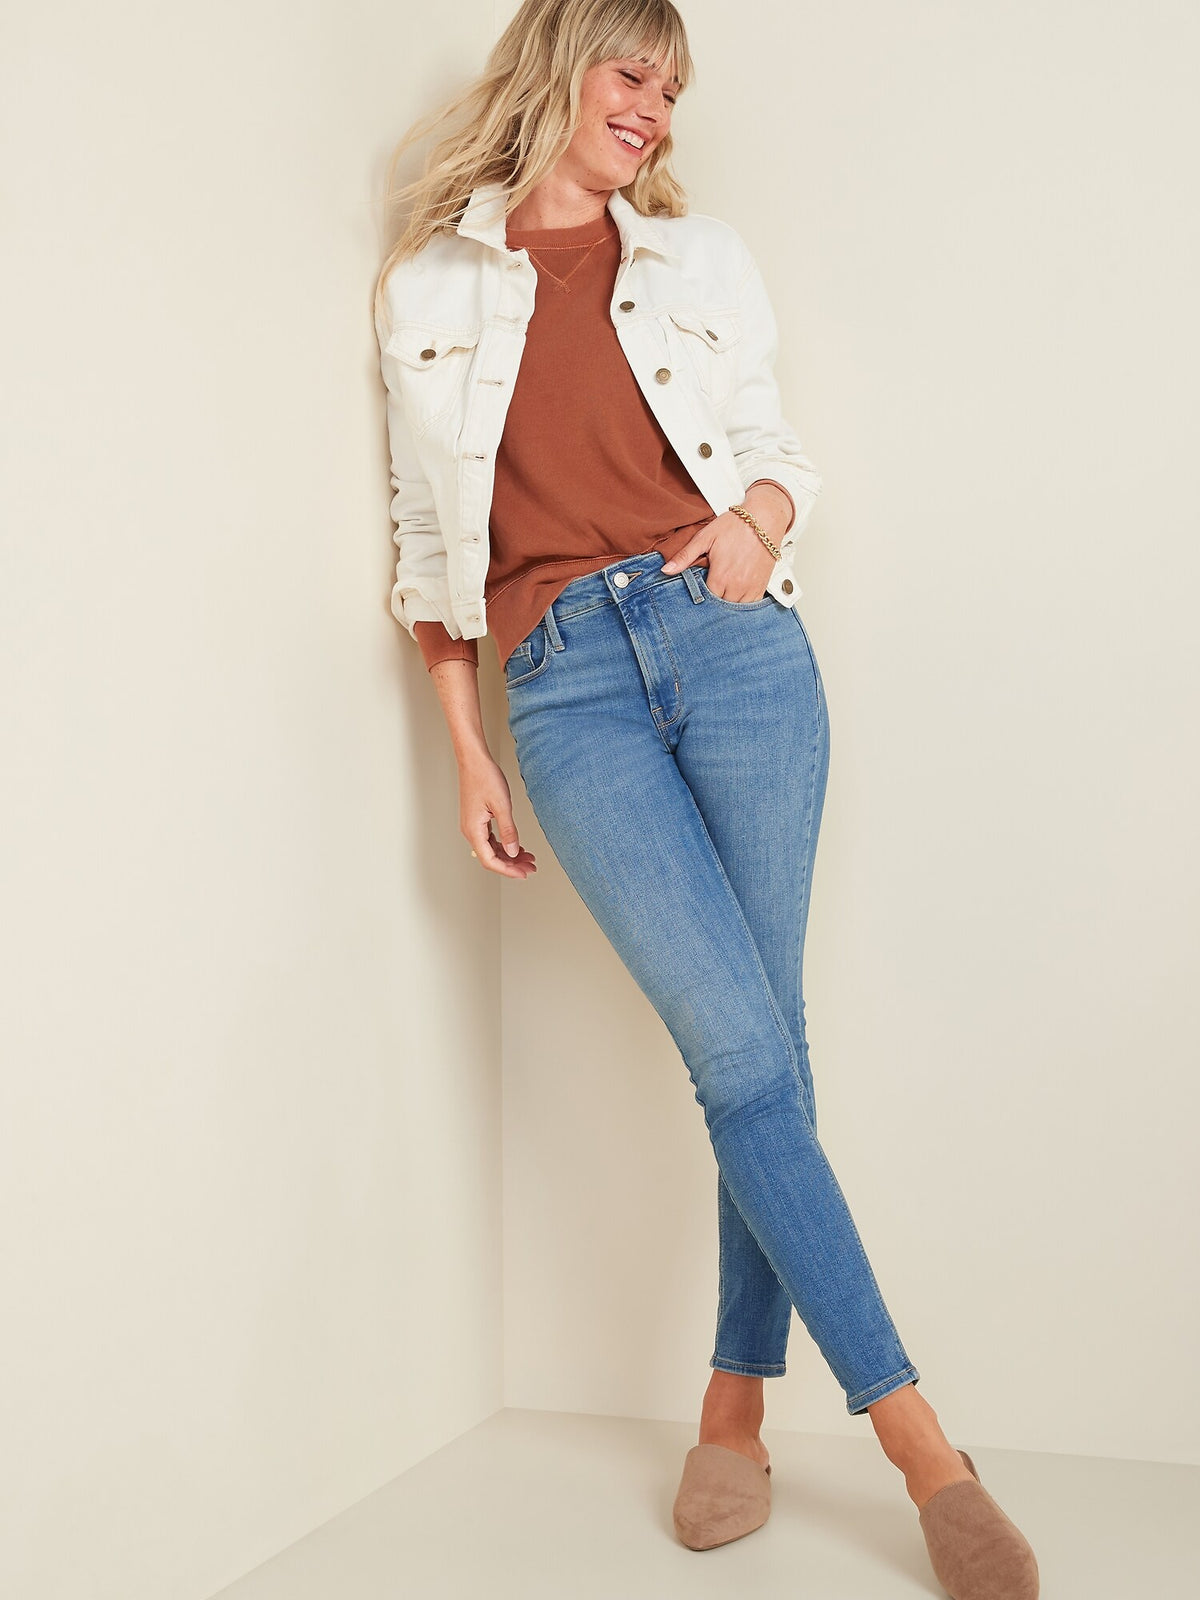 High-Waisted Rockstar Super Skinny Jeans for Women - Old Navy Philippines